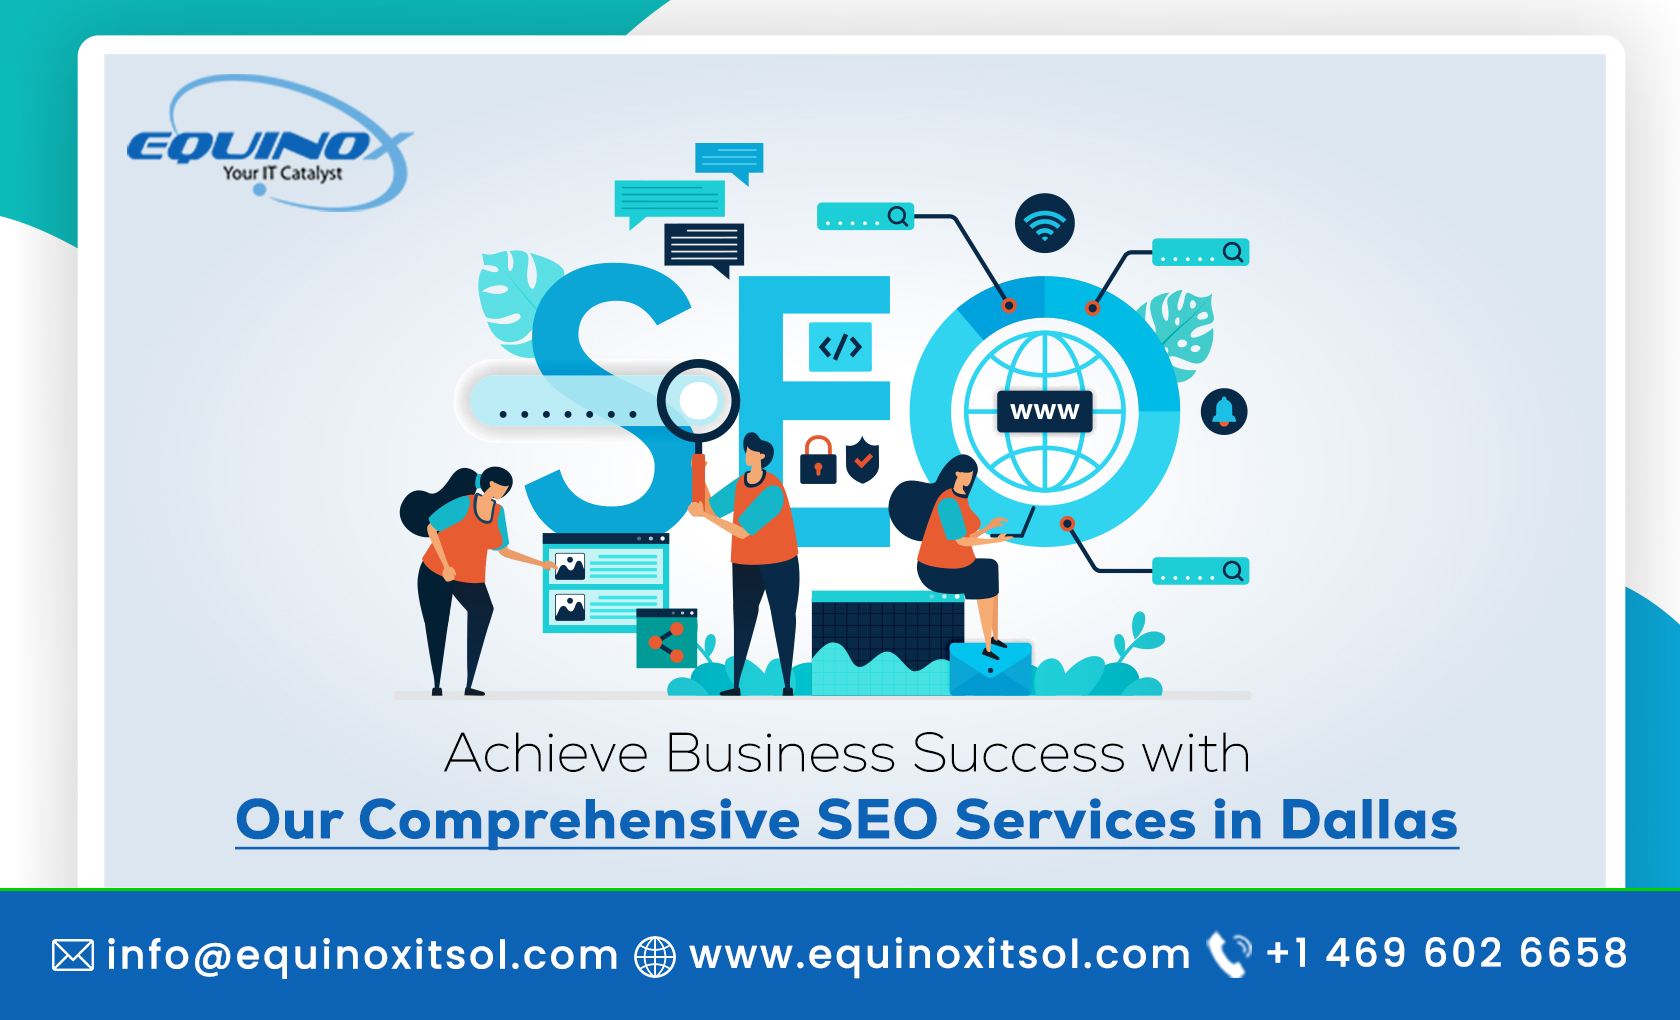 Achieve Business Success with Our Comprehensive SEO Services in Dallas